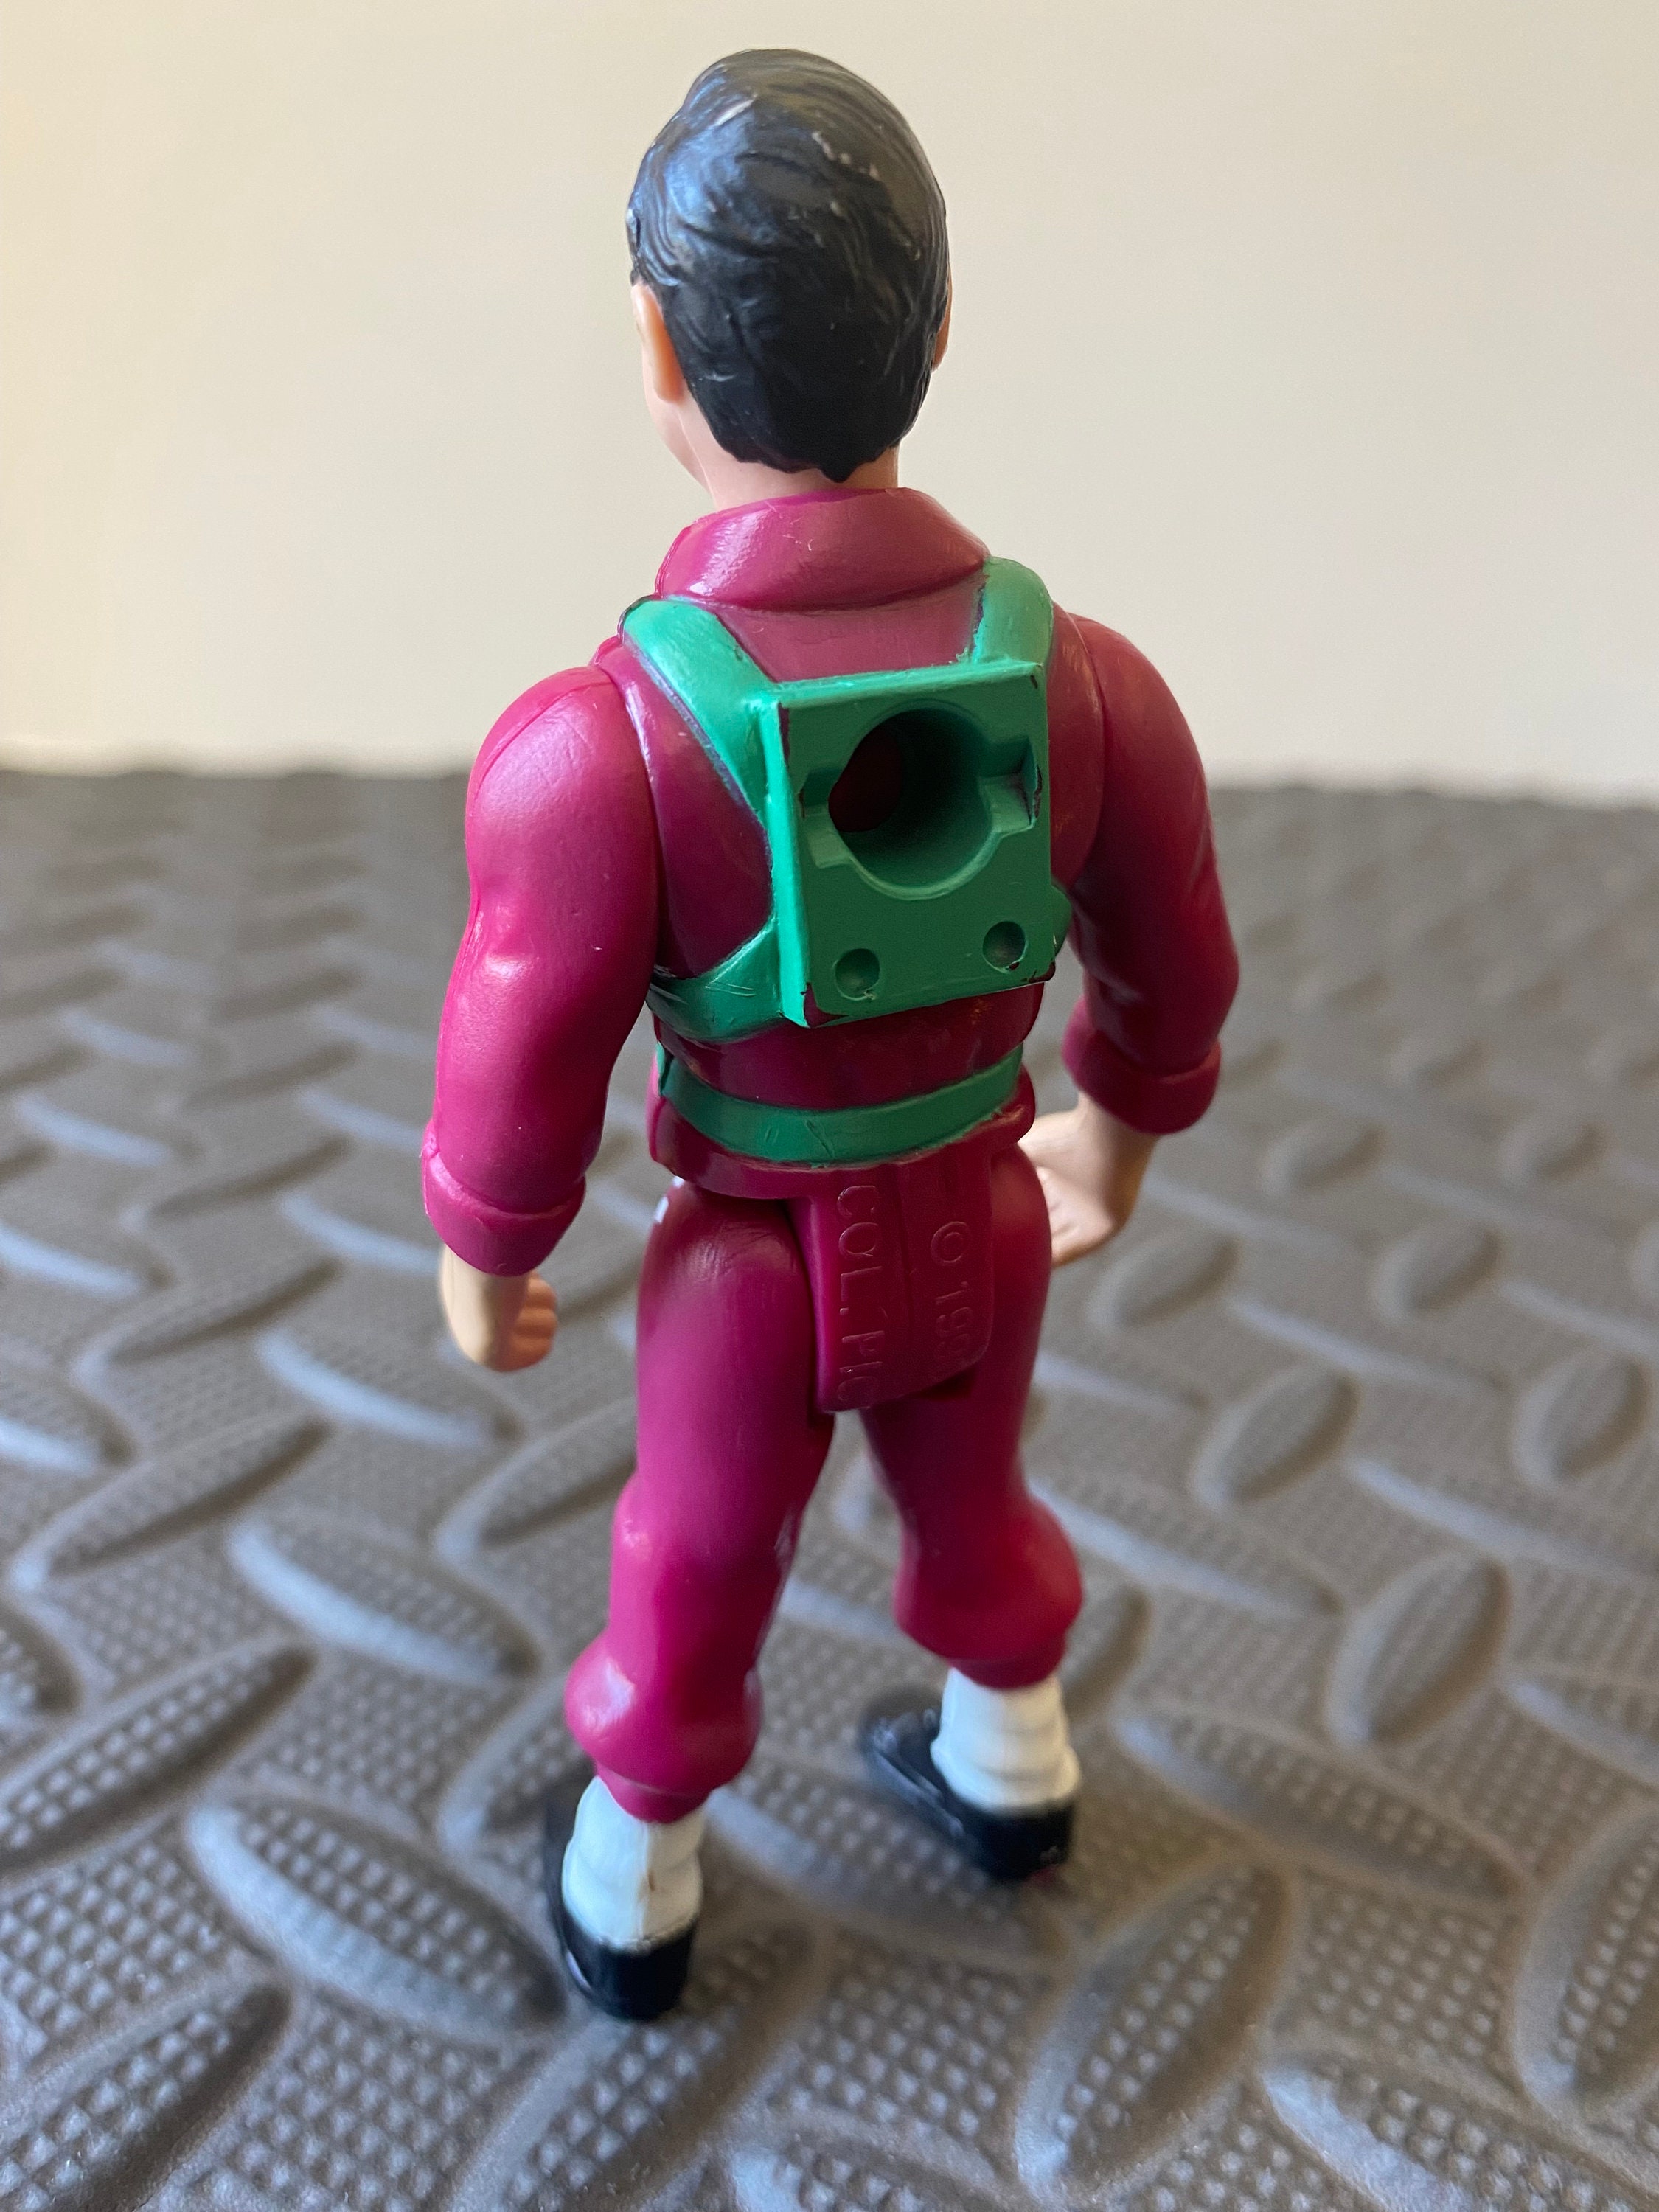 1986 Kenner The Real Ghostbusters Carded Action Figure - Power Pack Heroes  Louis Tully with Power Pincher and Vapor Ghost